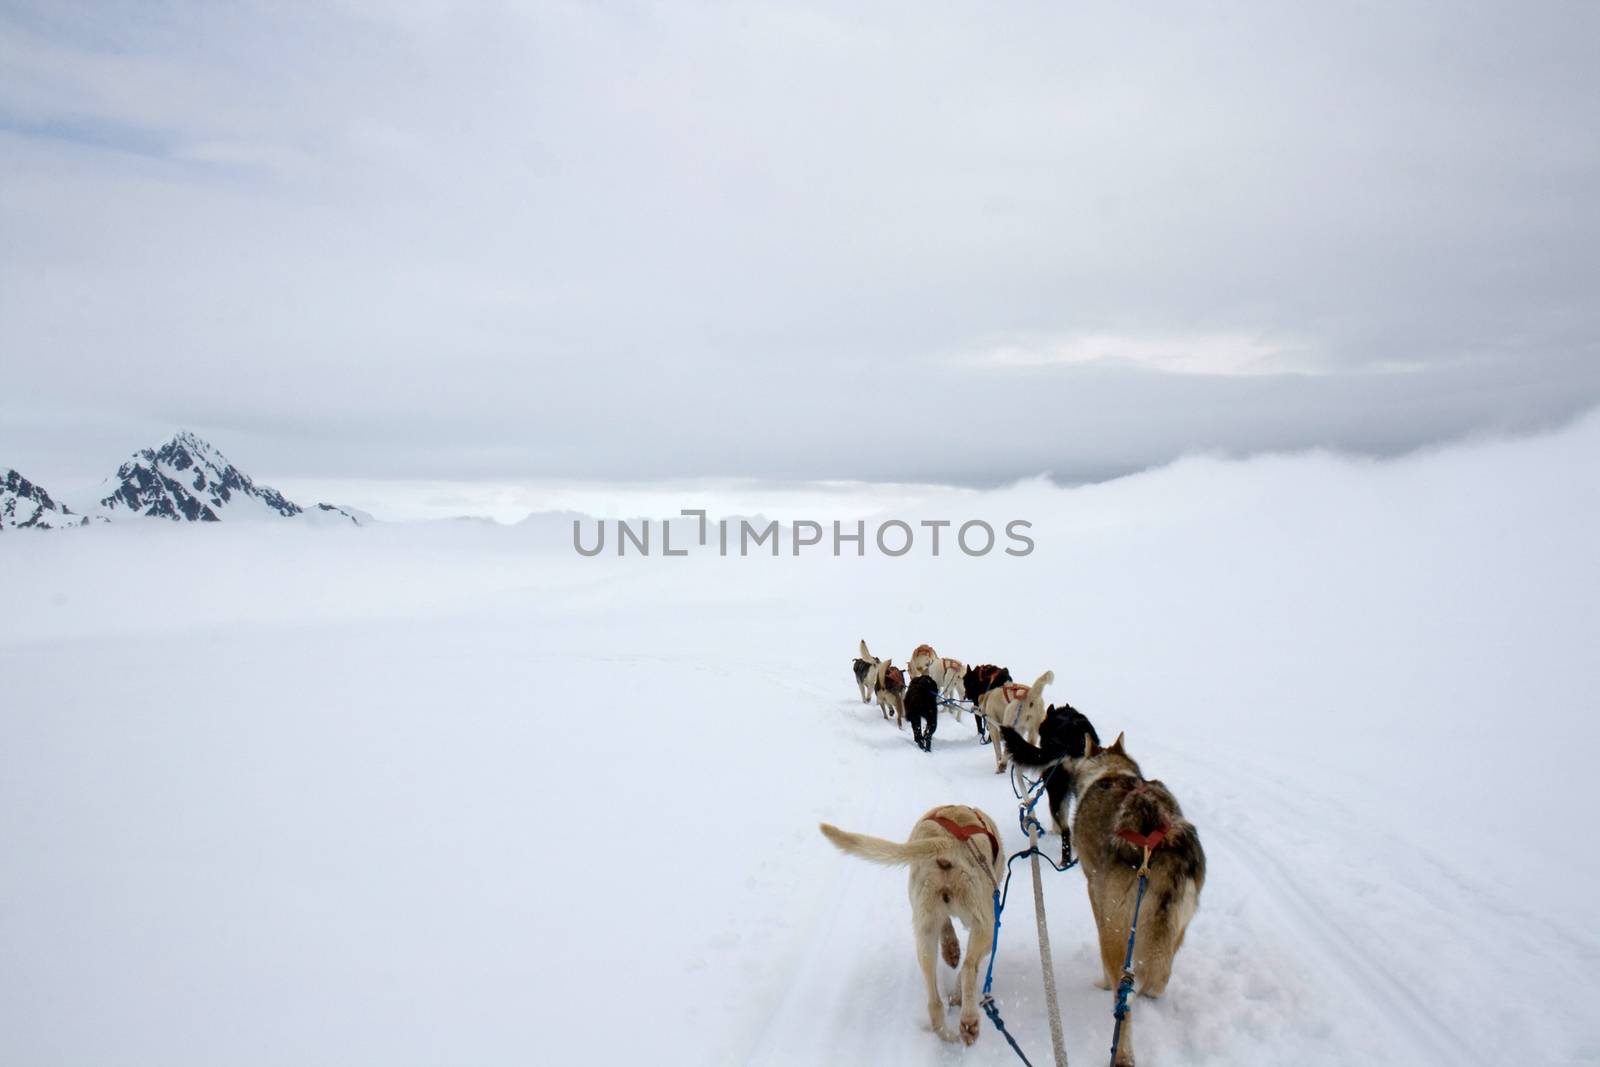 View From Dog Sled on Snow by NikkiGensert